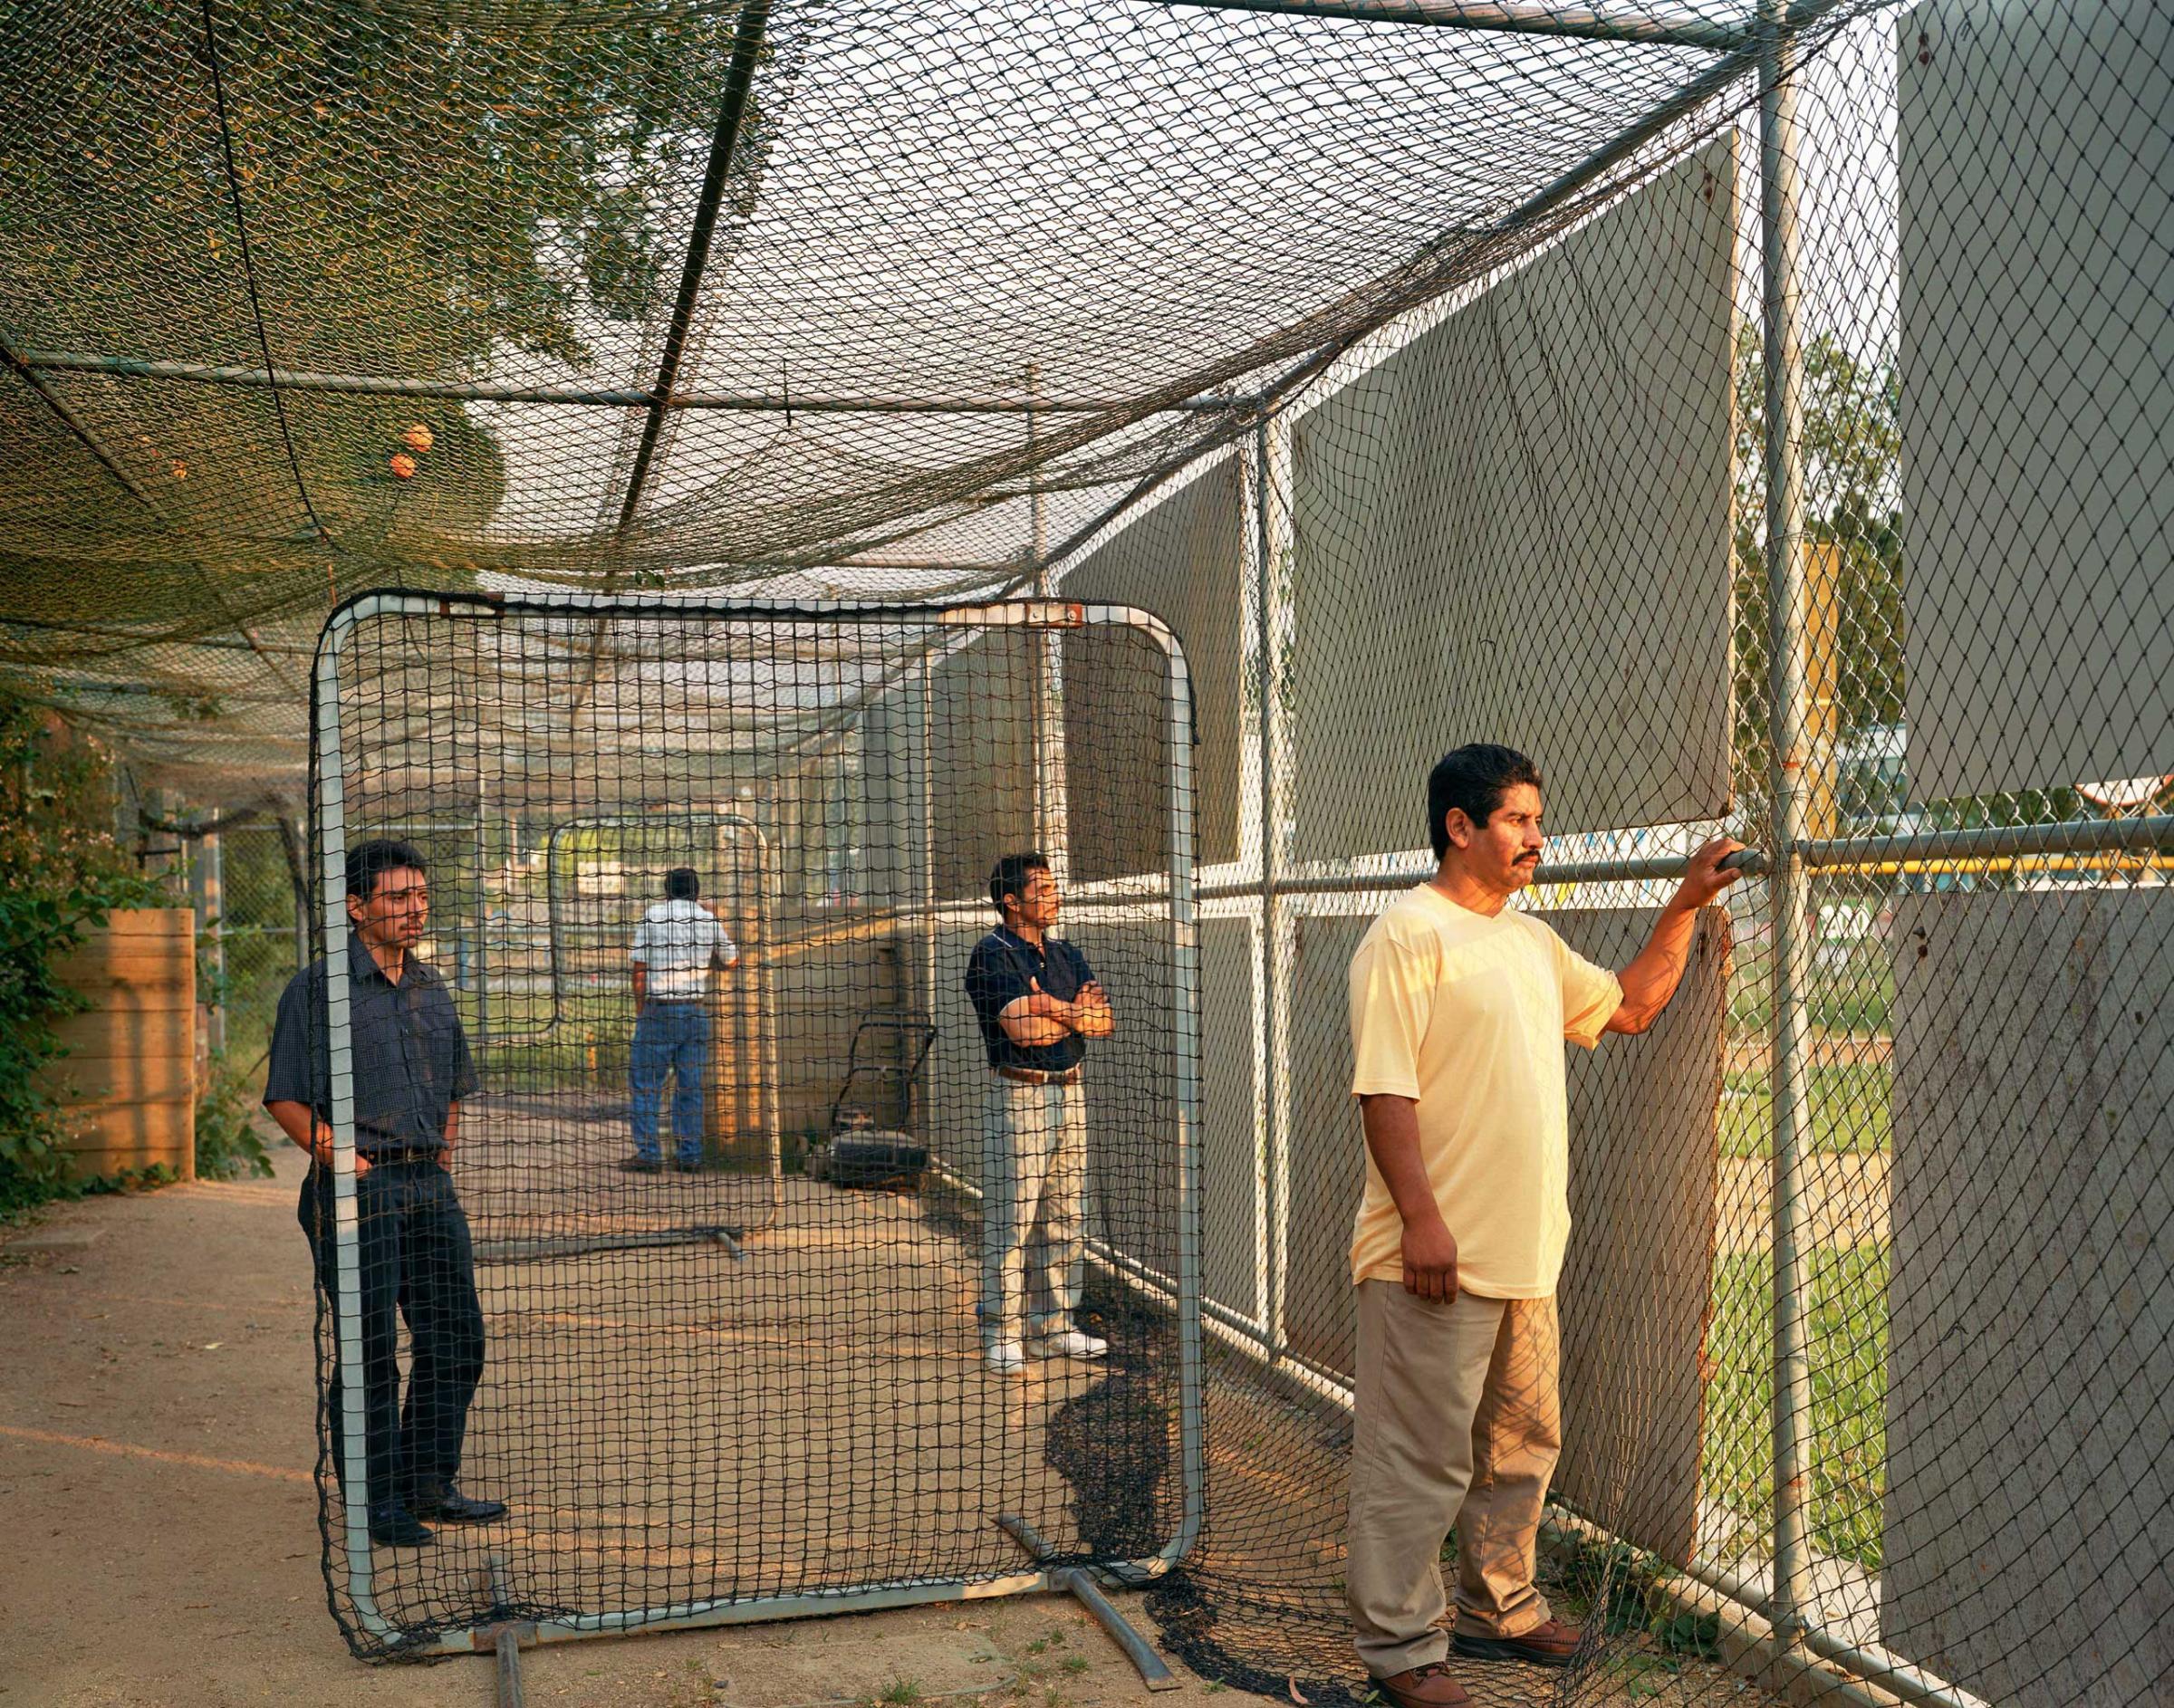 Batting Cage, 2007, from the series Homeland